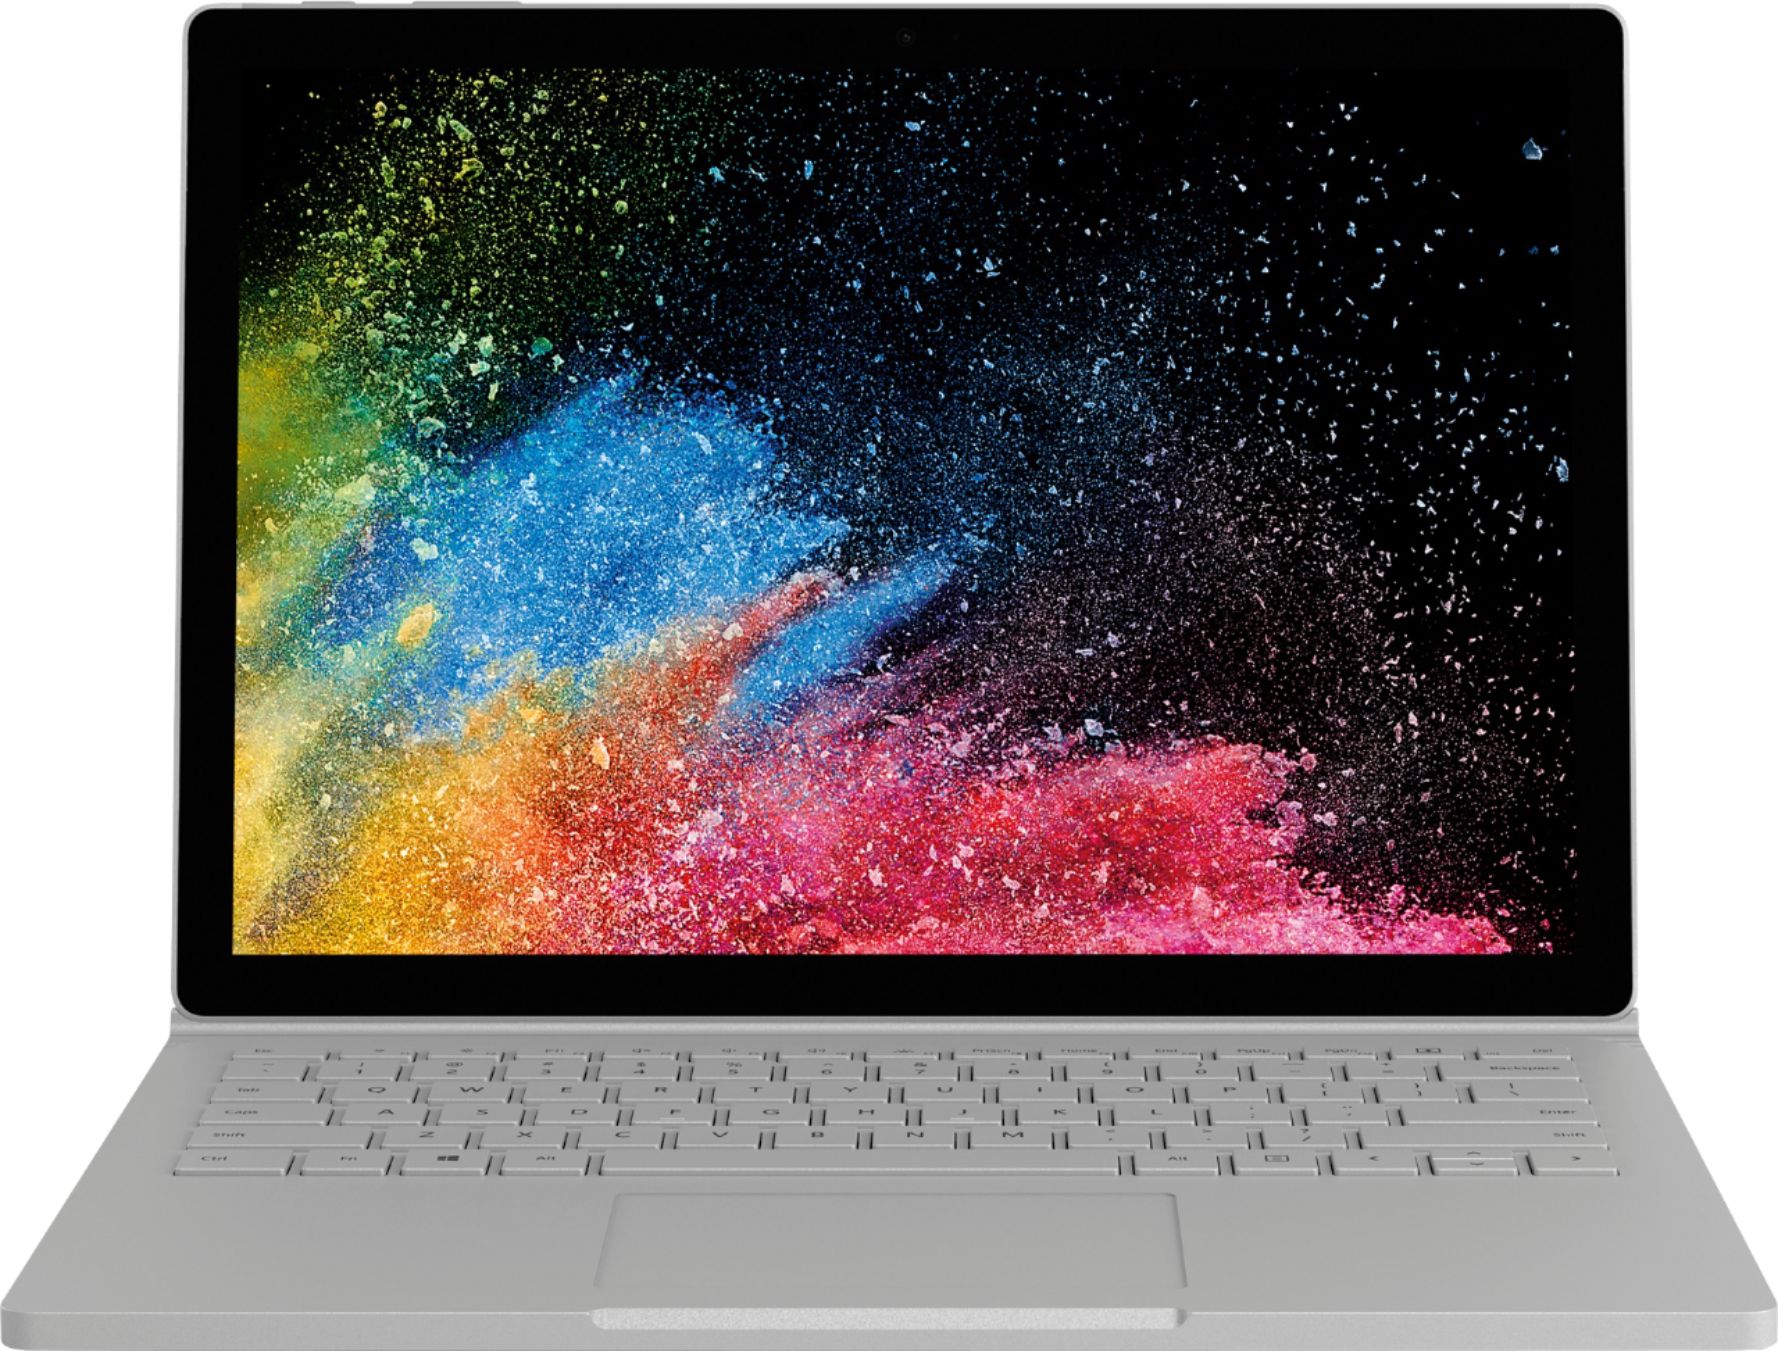 Angle View: Microsoft - Geek Squad Certified Refurbished Surface Laptop 3 15" Touch-Screen Laptop - AMD Ryzen 5 - 8GB Memory - 128GB SSD